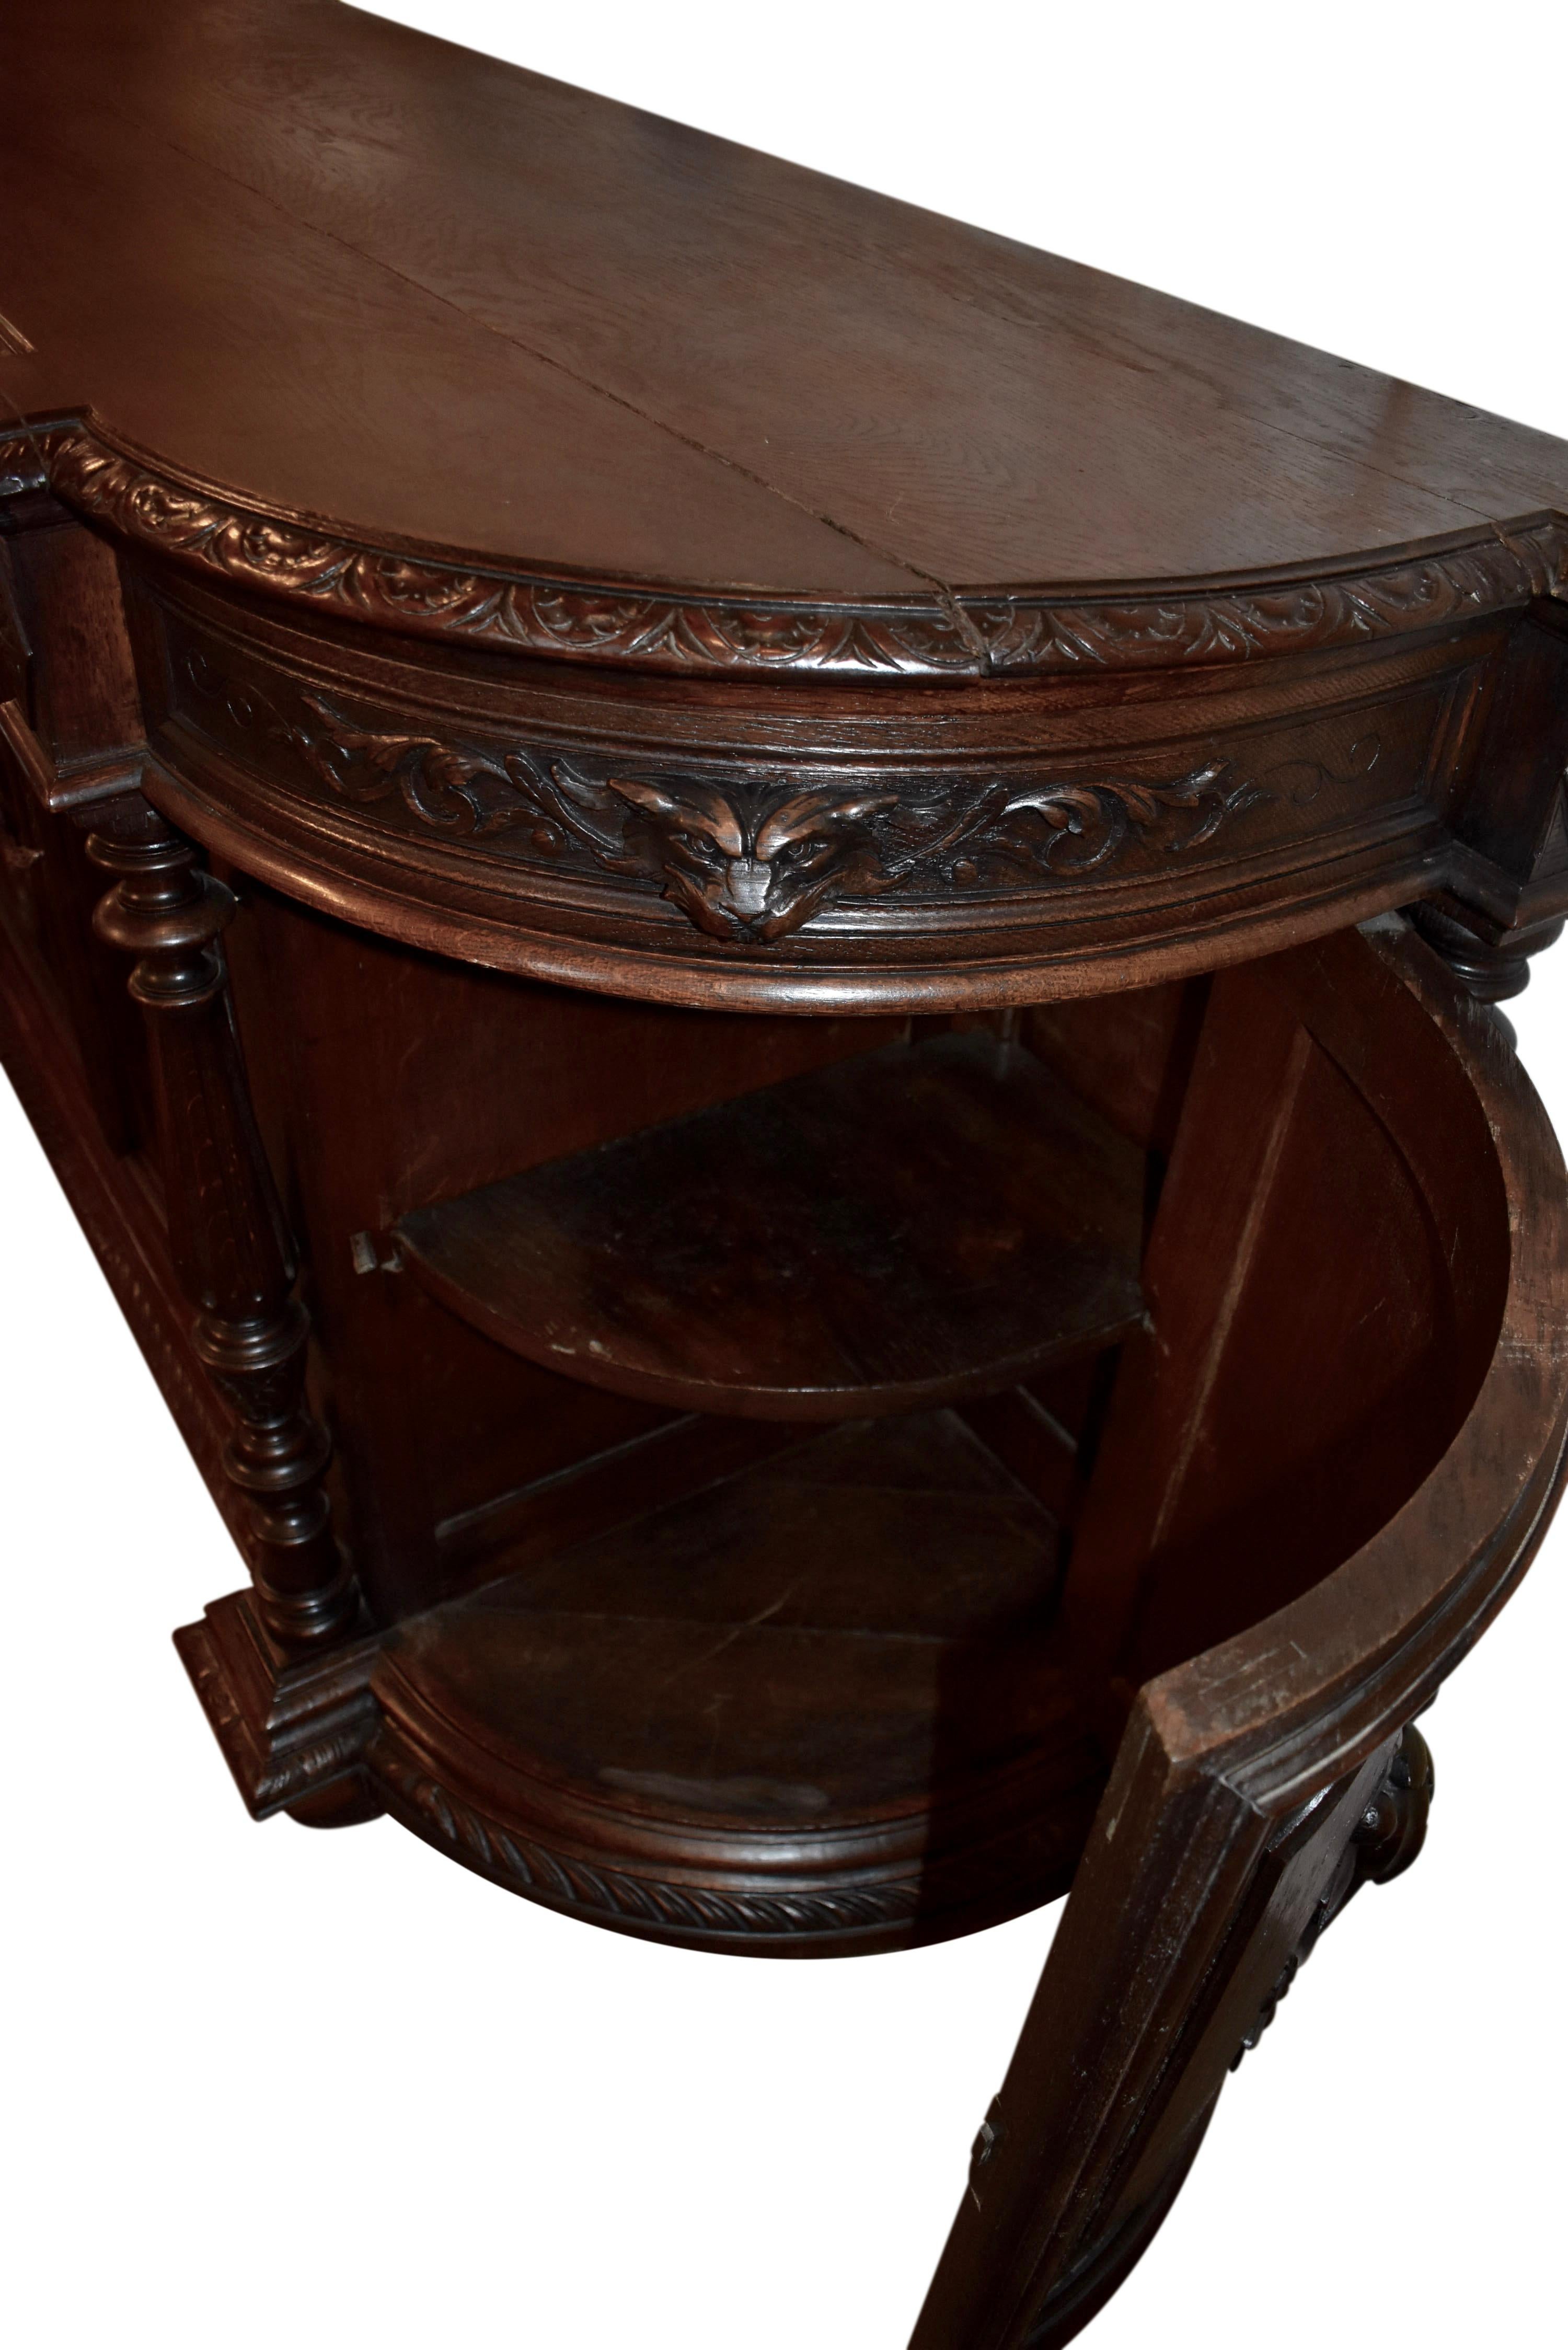 French Renaissance Revival Hunt Sideboard, circa 1895 For Sale 4